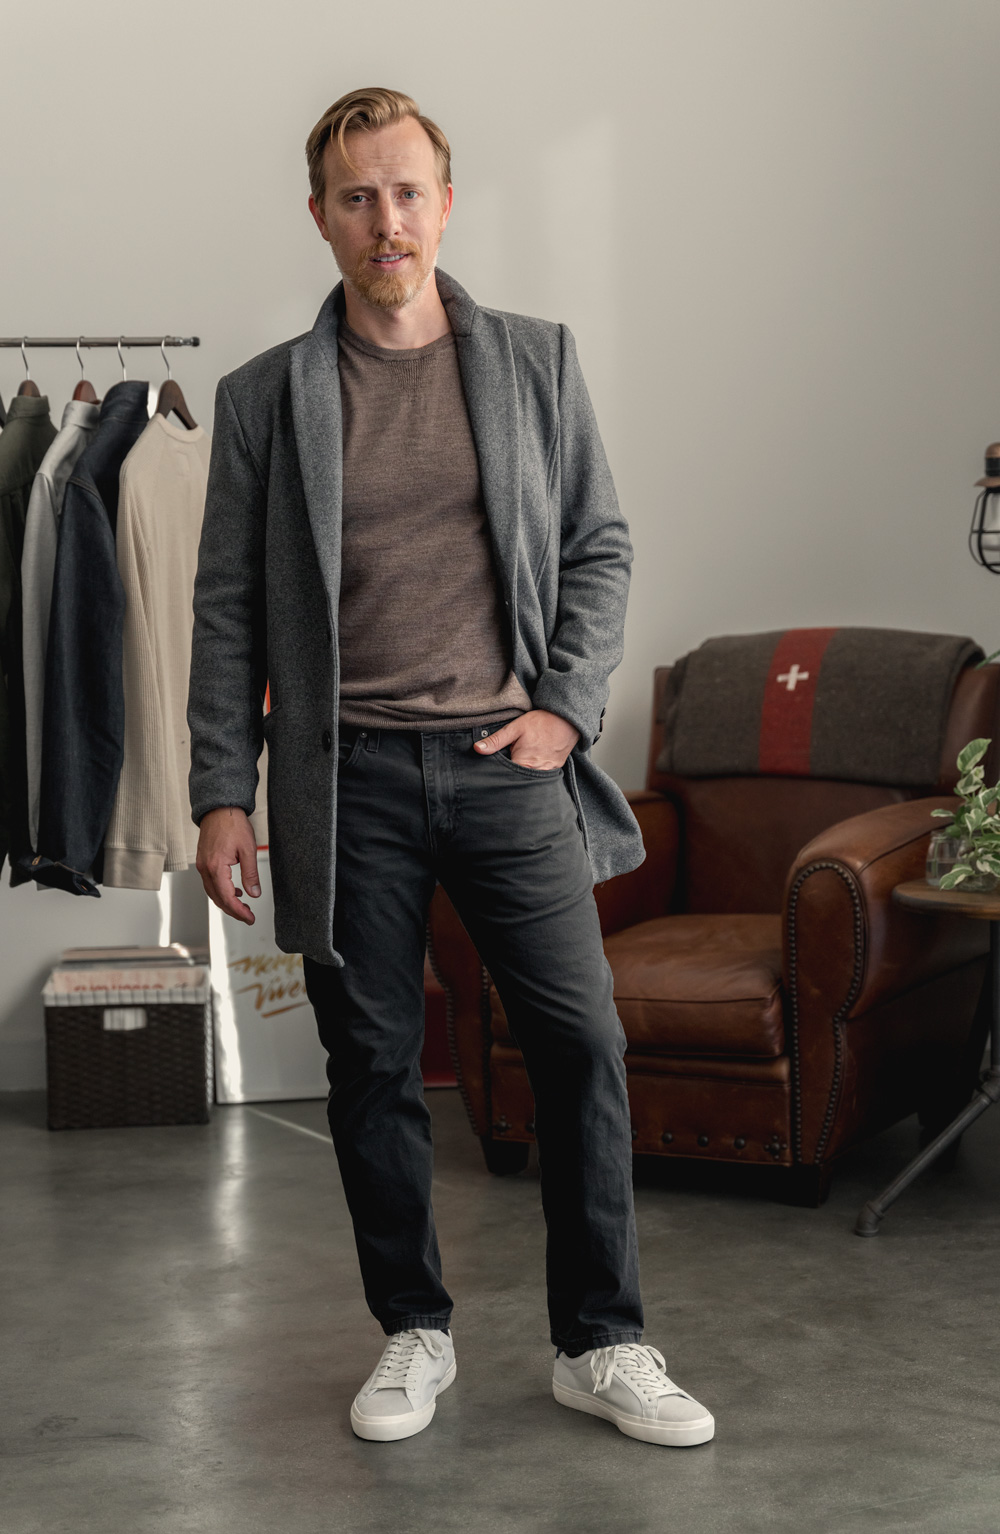 a minimalist men's outfit with gray topcoat, brown sweater, dark gray jeans, and white sneakers